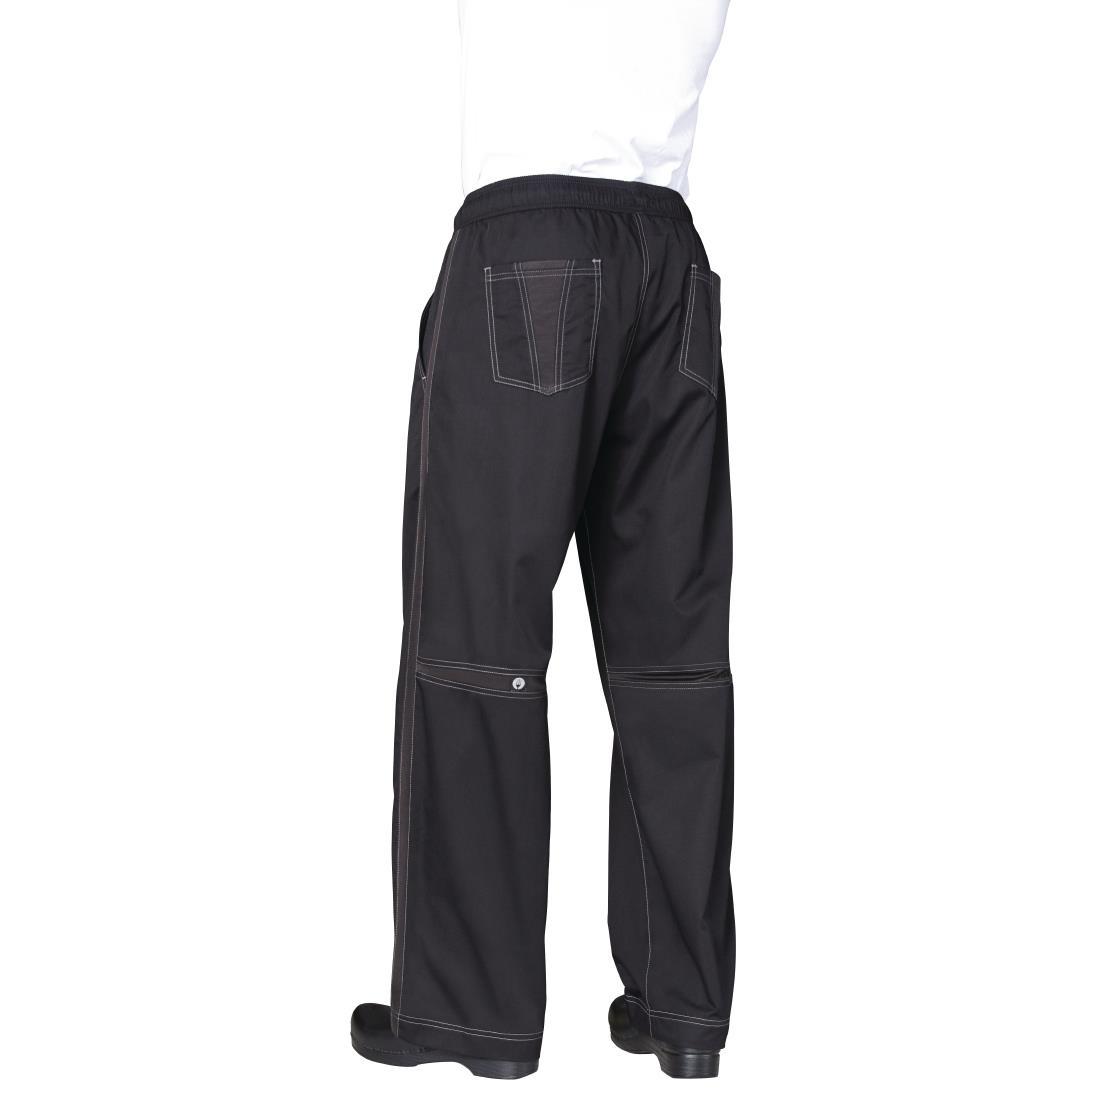 Chef Works Unisex Cool Vent Baggy Chefs Trousers Black XL - B187-XL  - 2